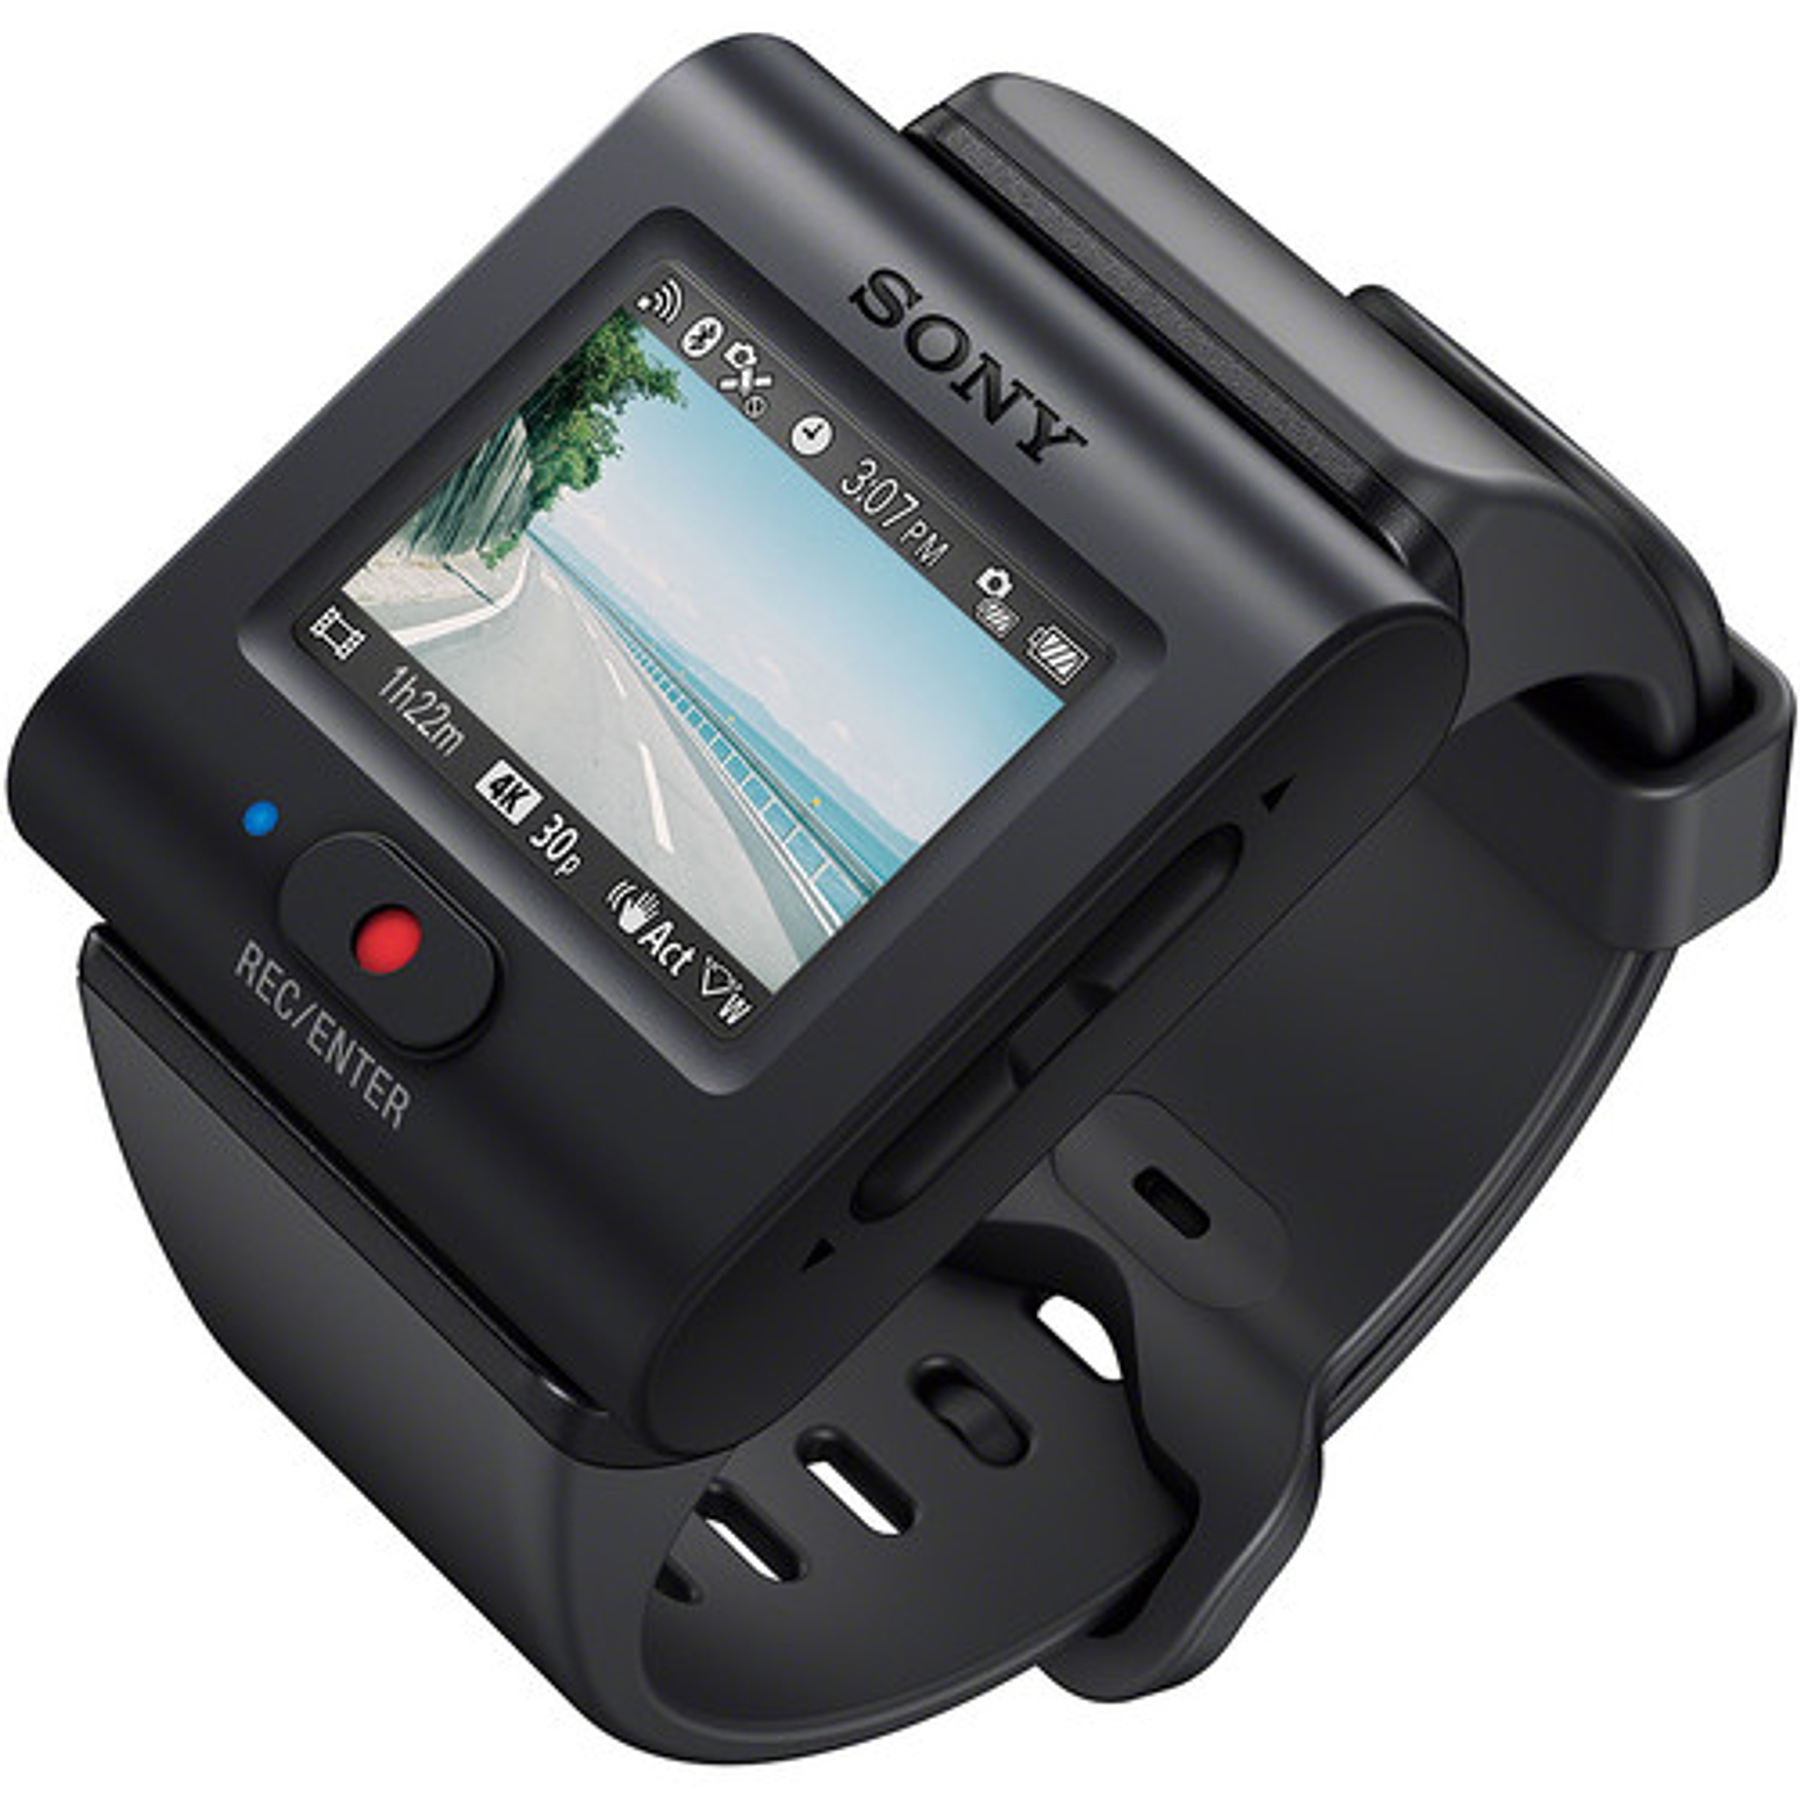 Action Cam HDR-AS300 con Wi-Fi